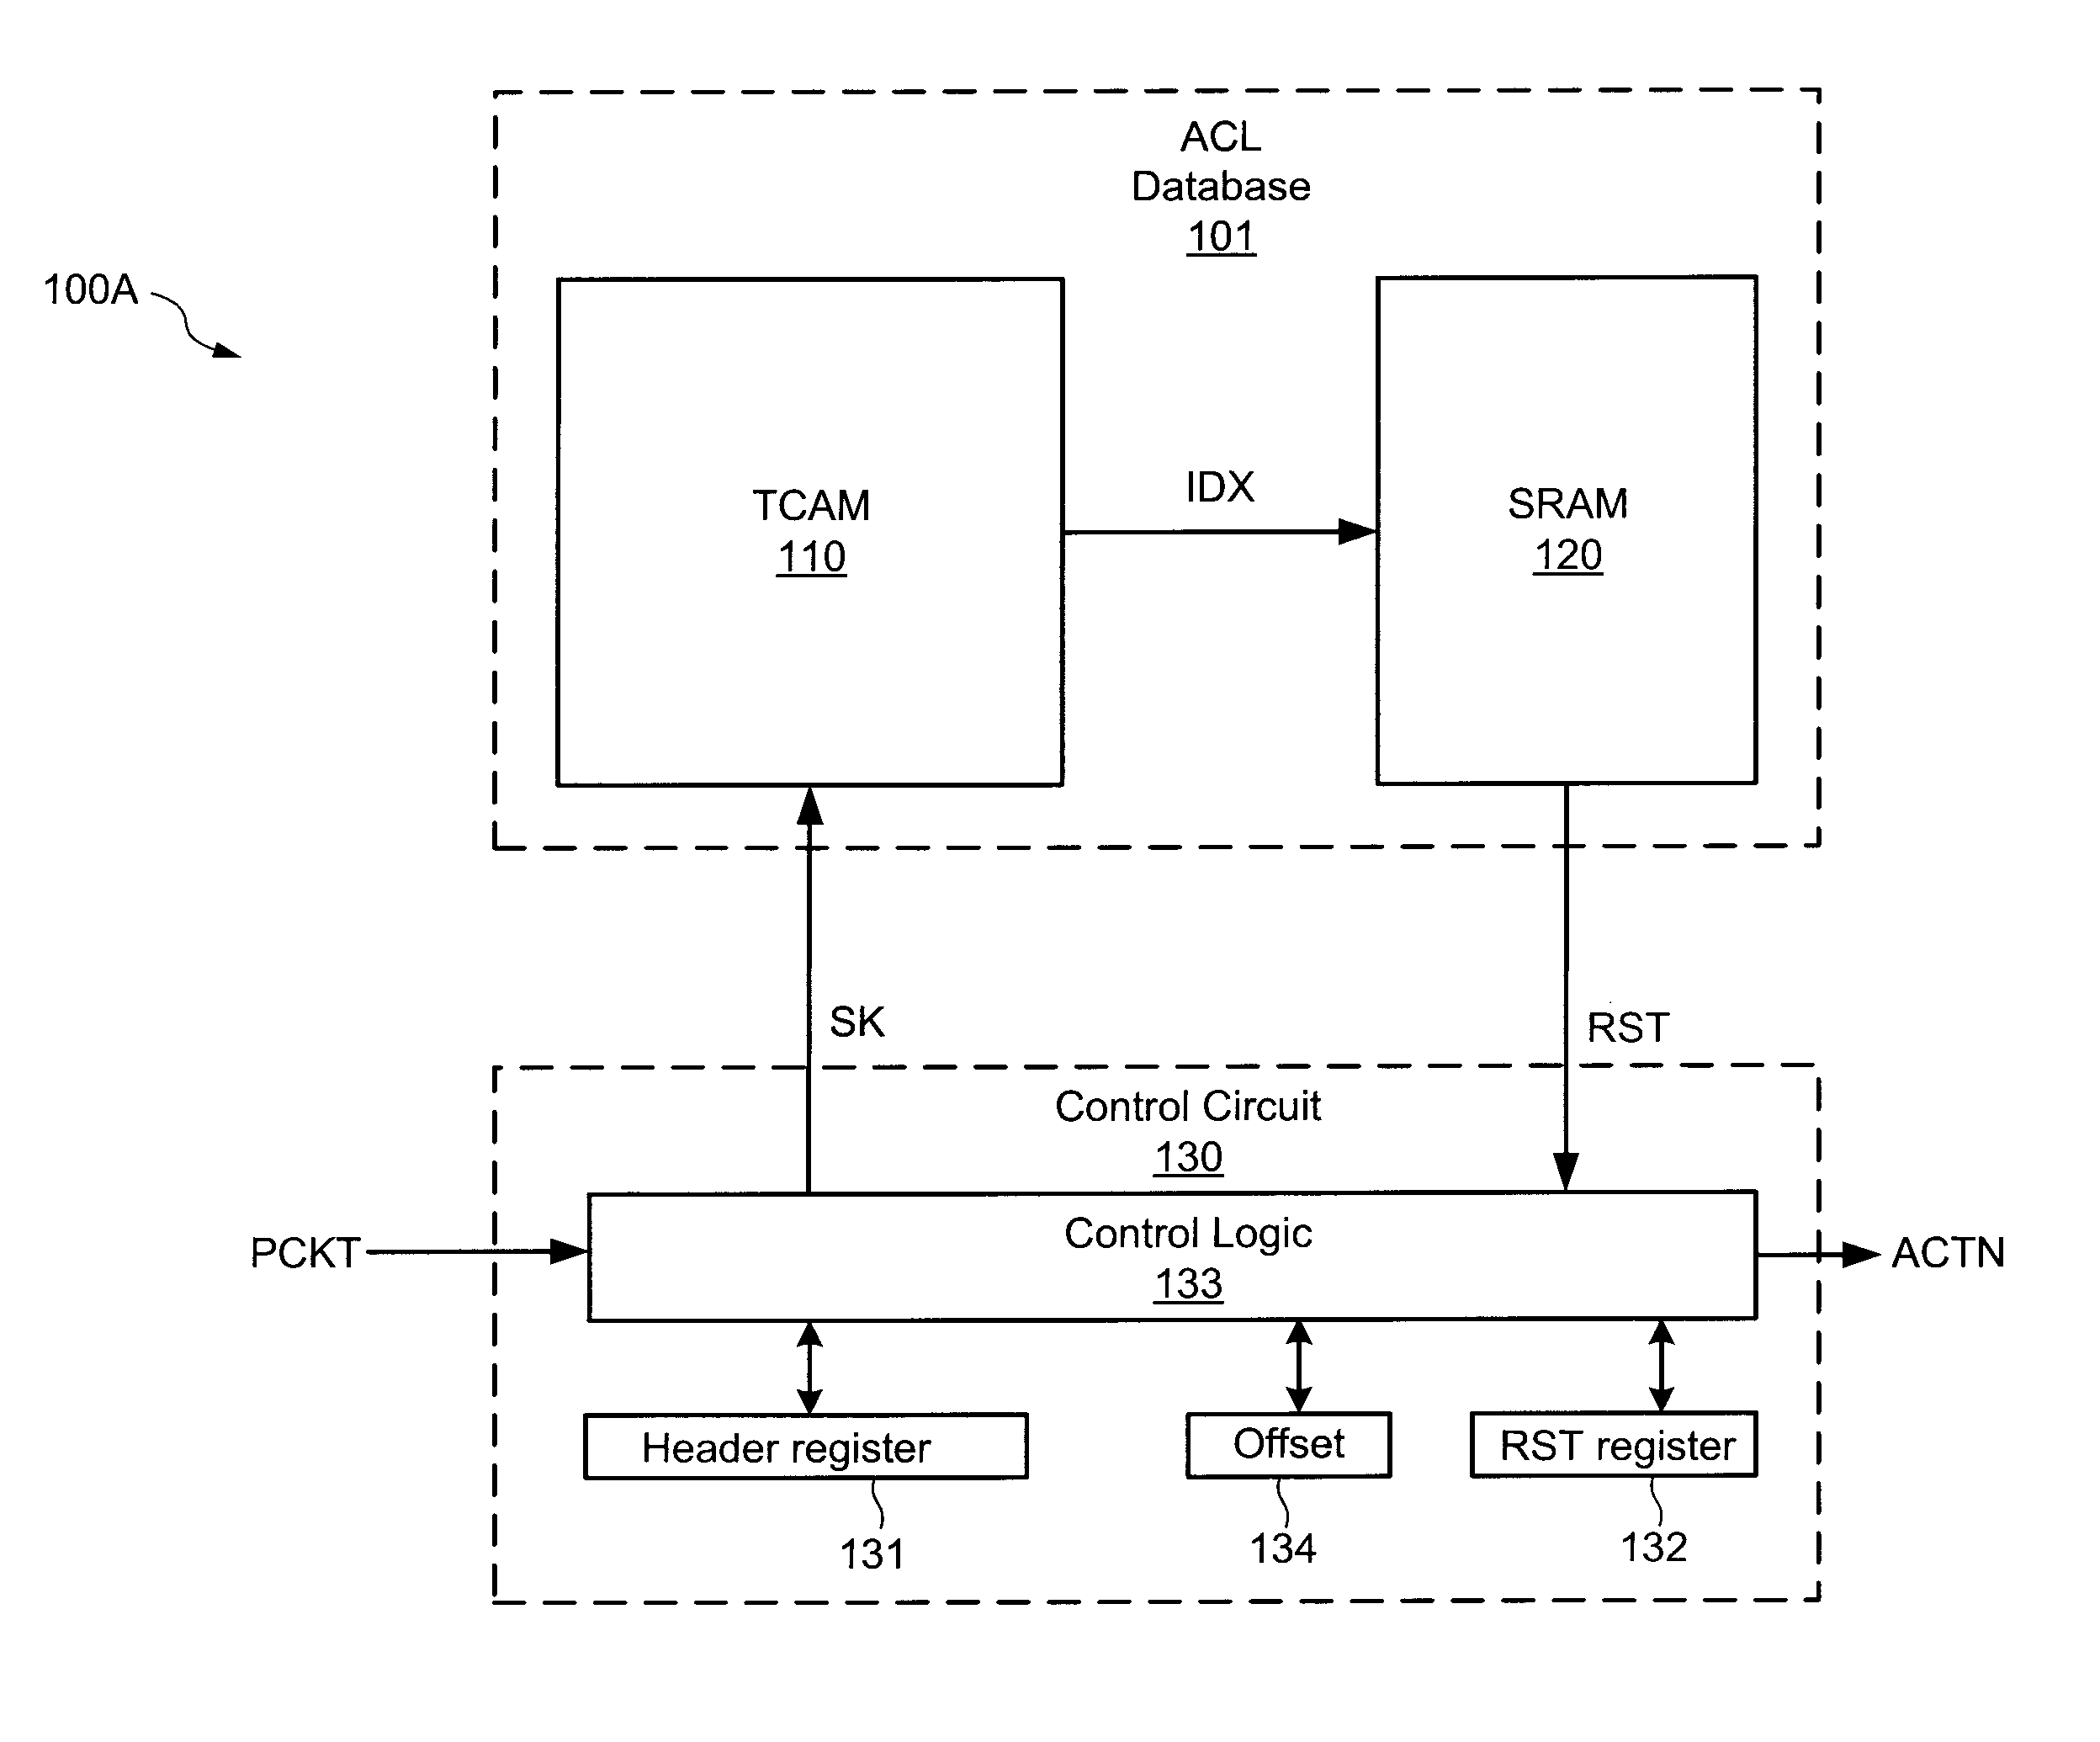 Packet classification device for storing groups of rules